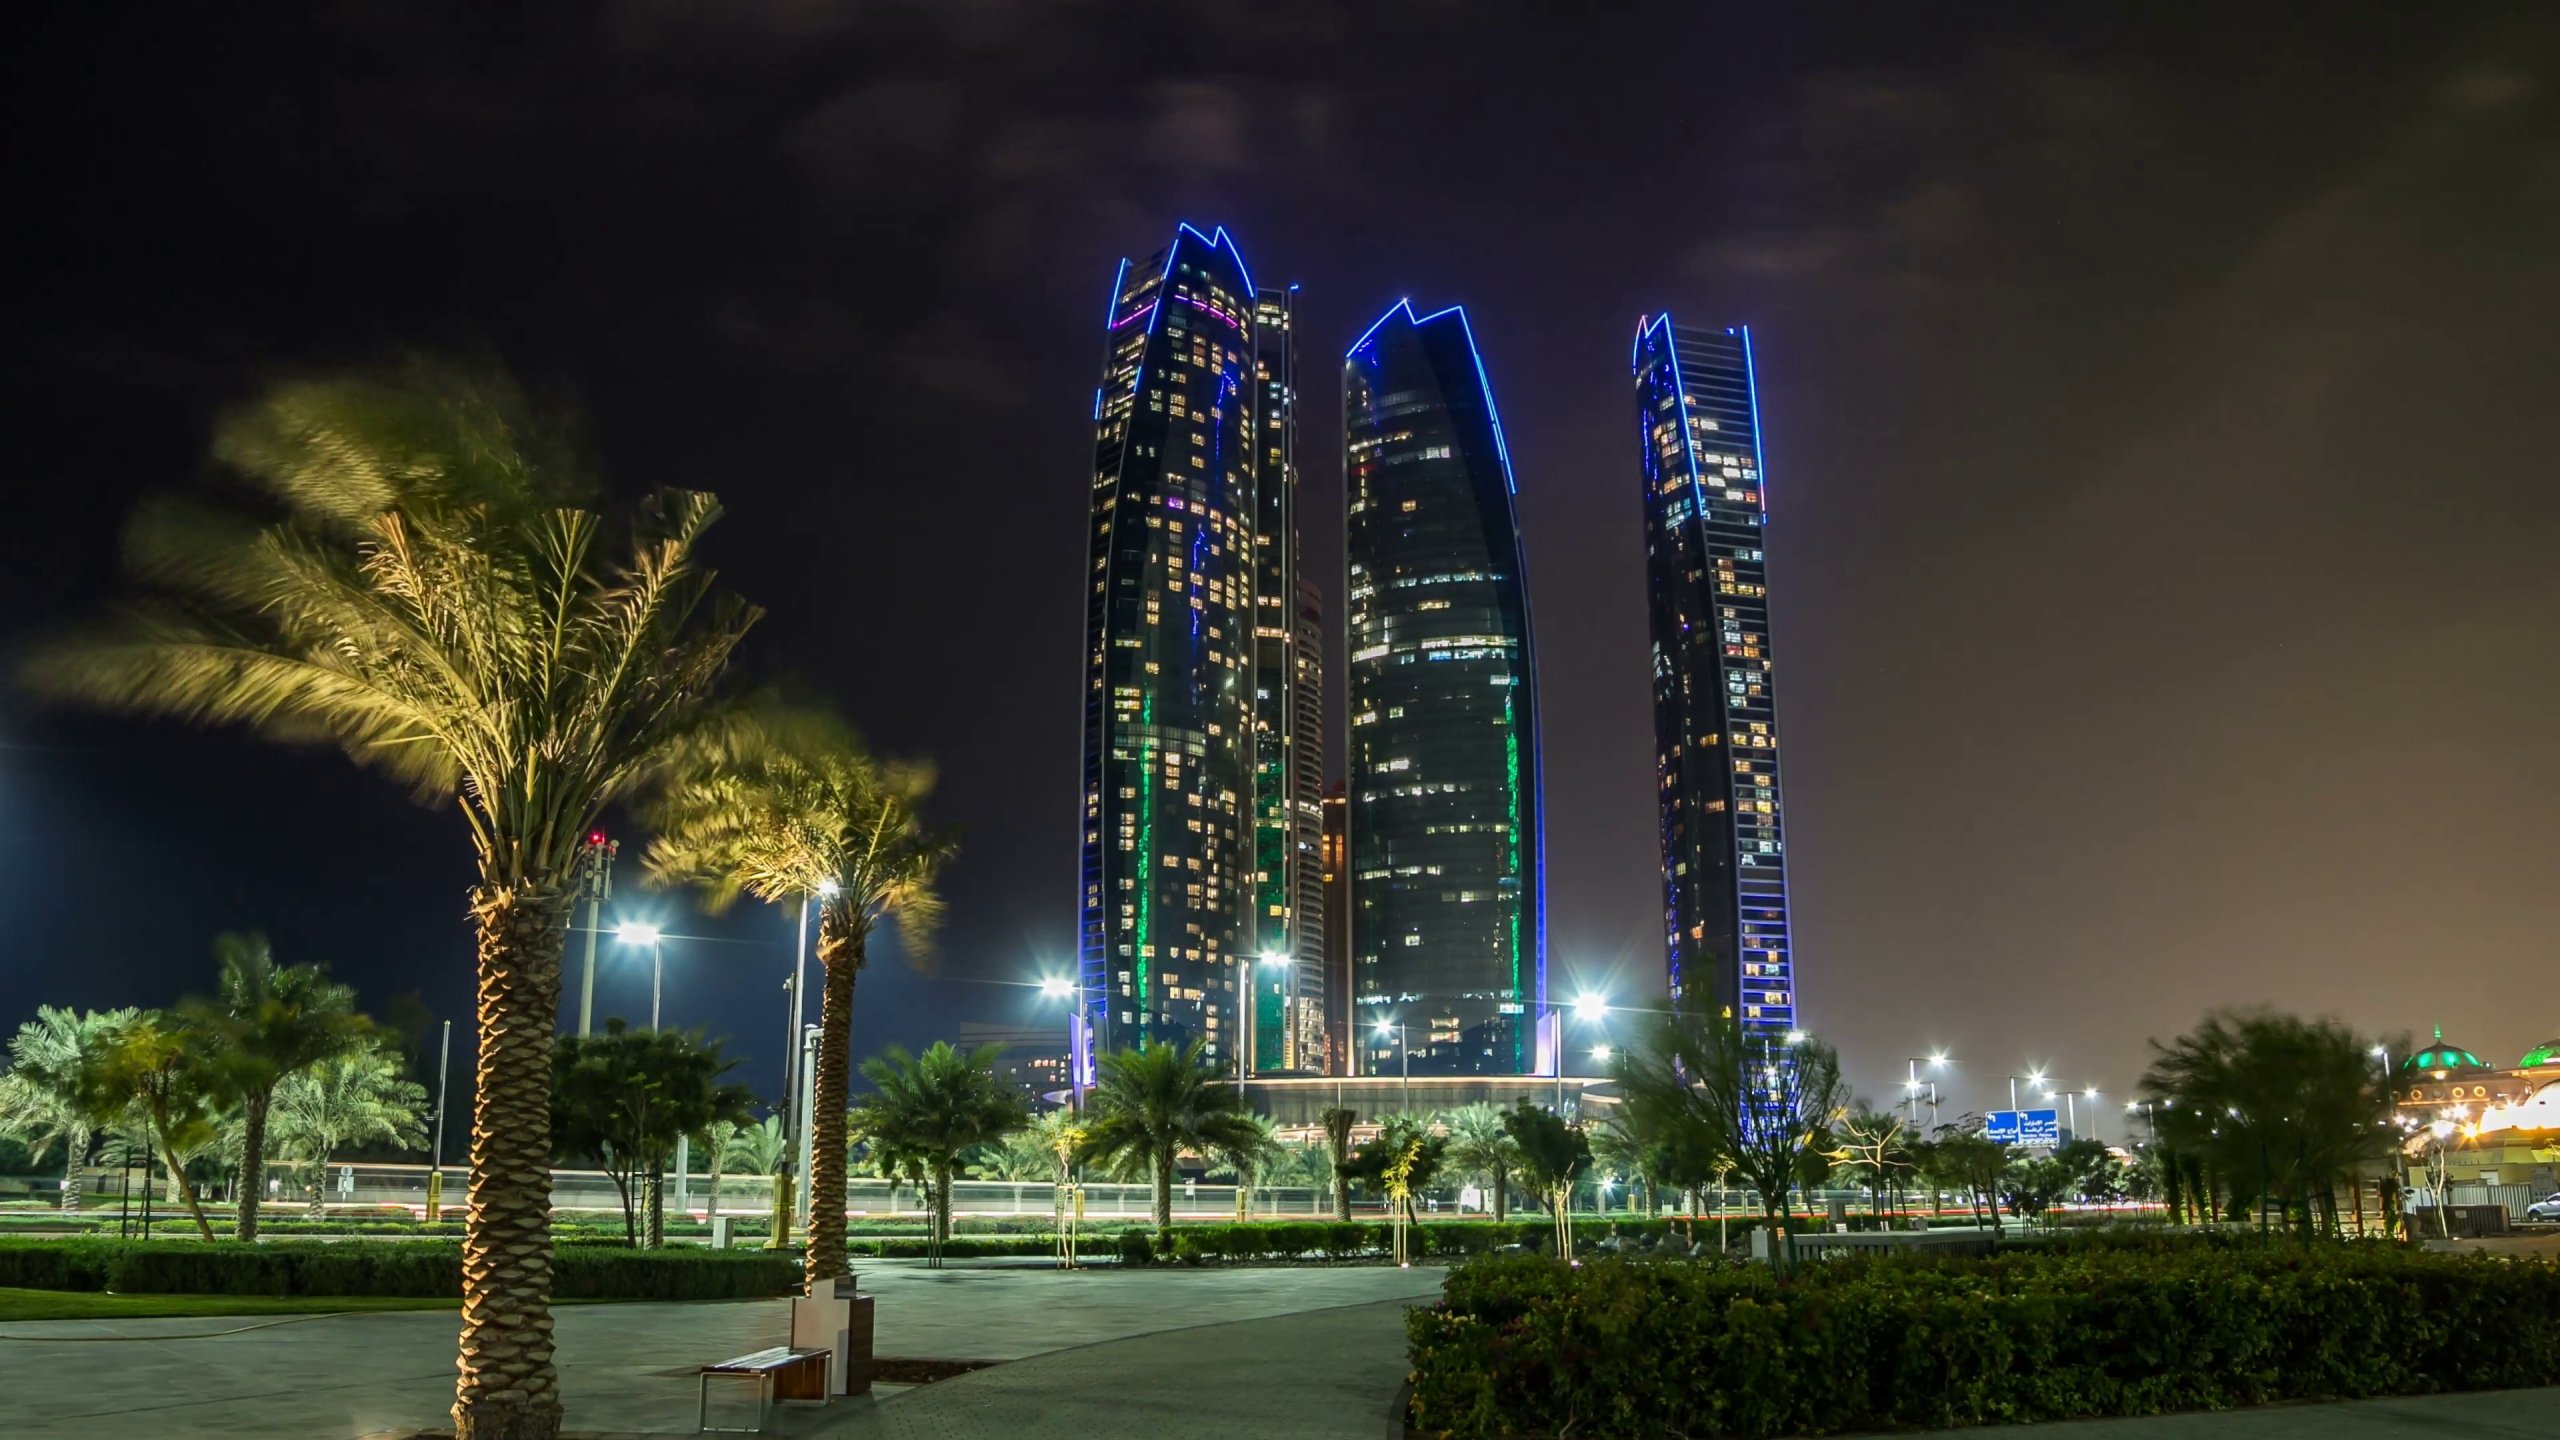 500 Abu Dhabi Pictures HD  Download Free Images on Unsplash